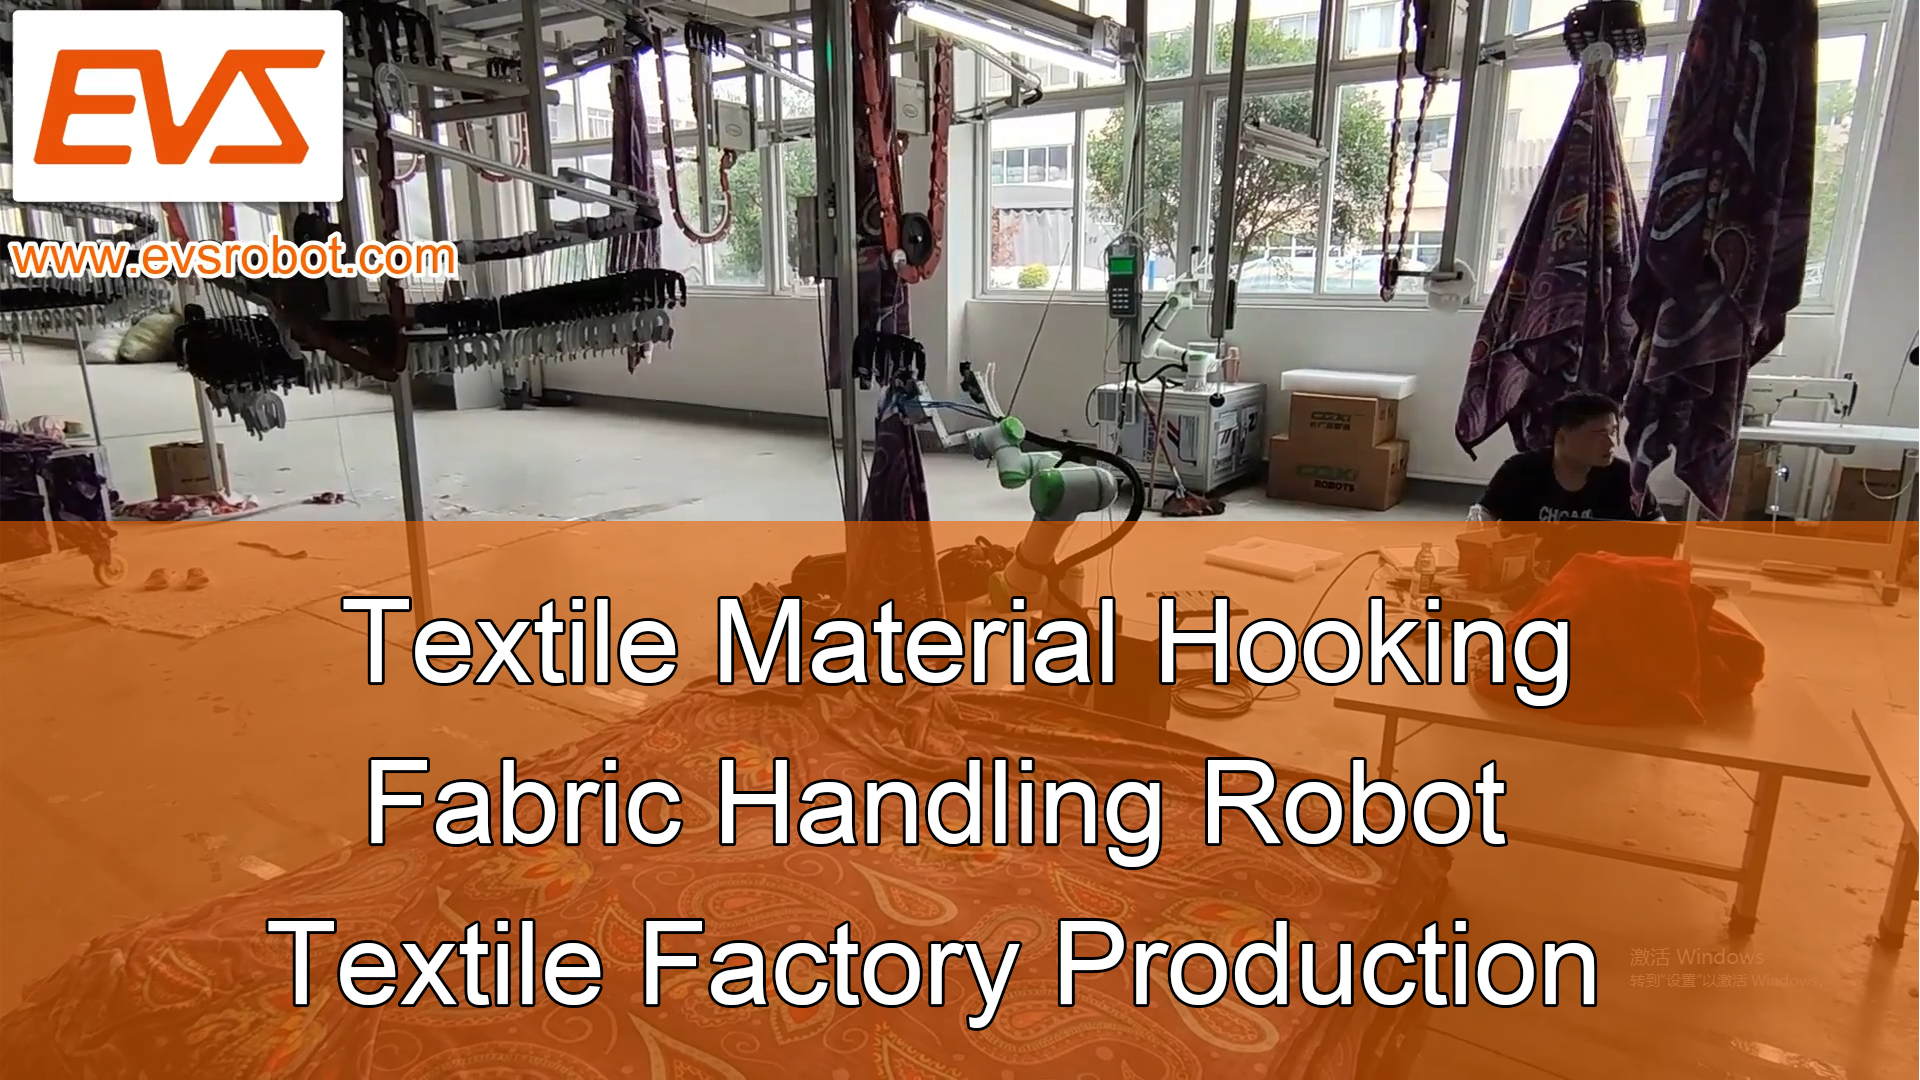 Textile Material Hooking | Fabric Handling Robot | Textile Factory Production